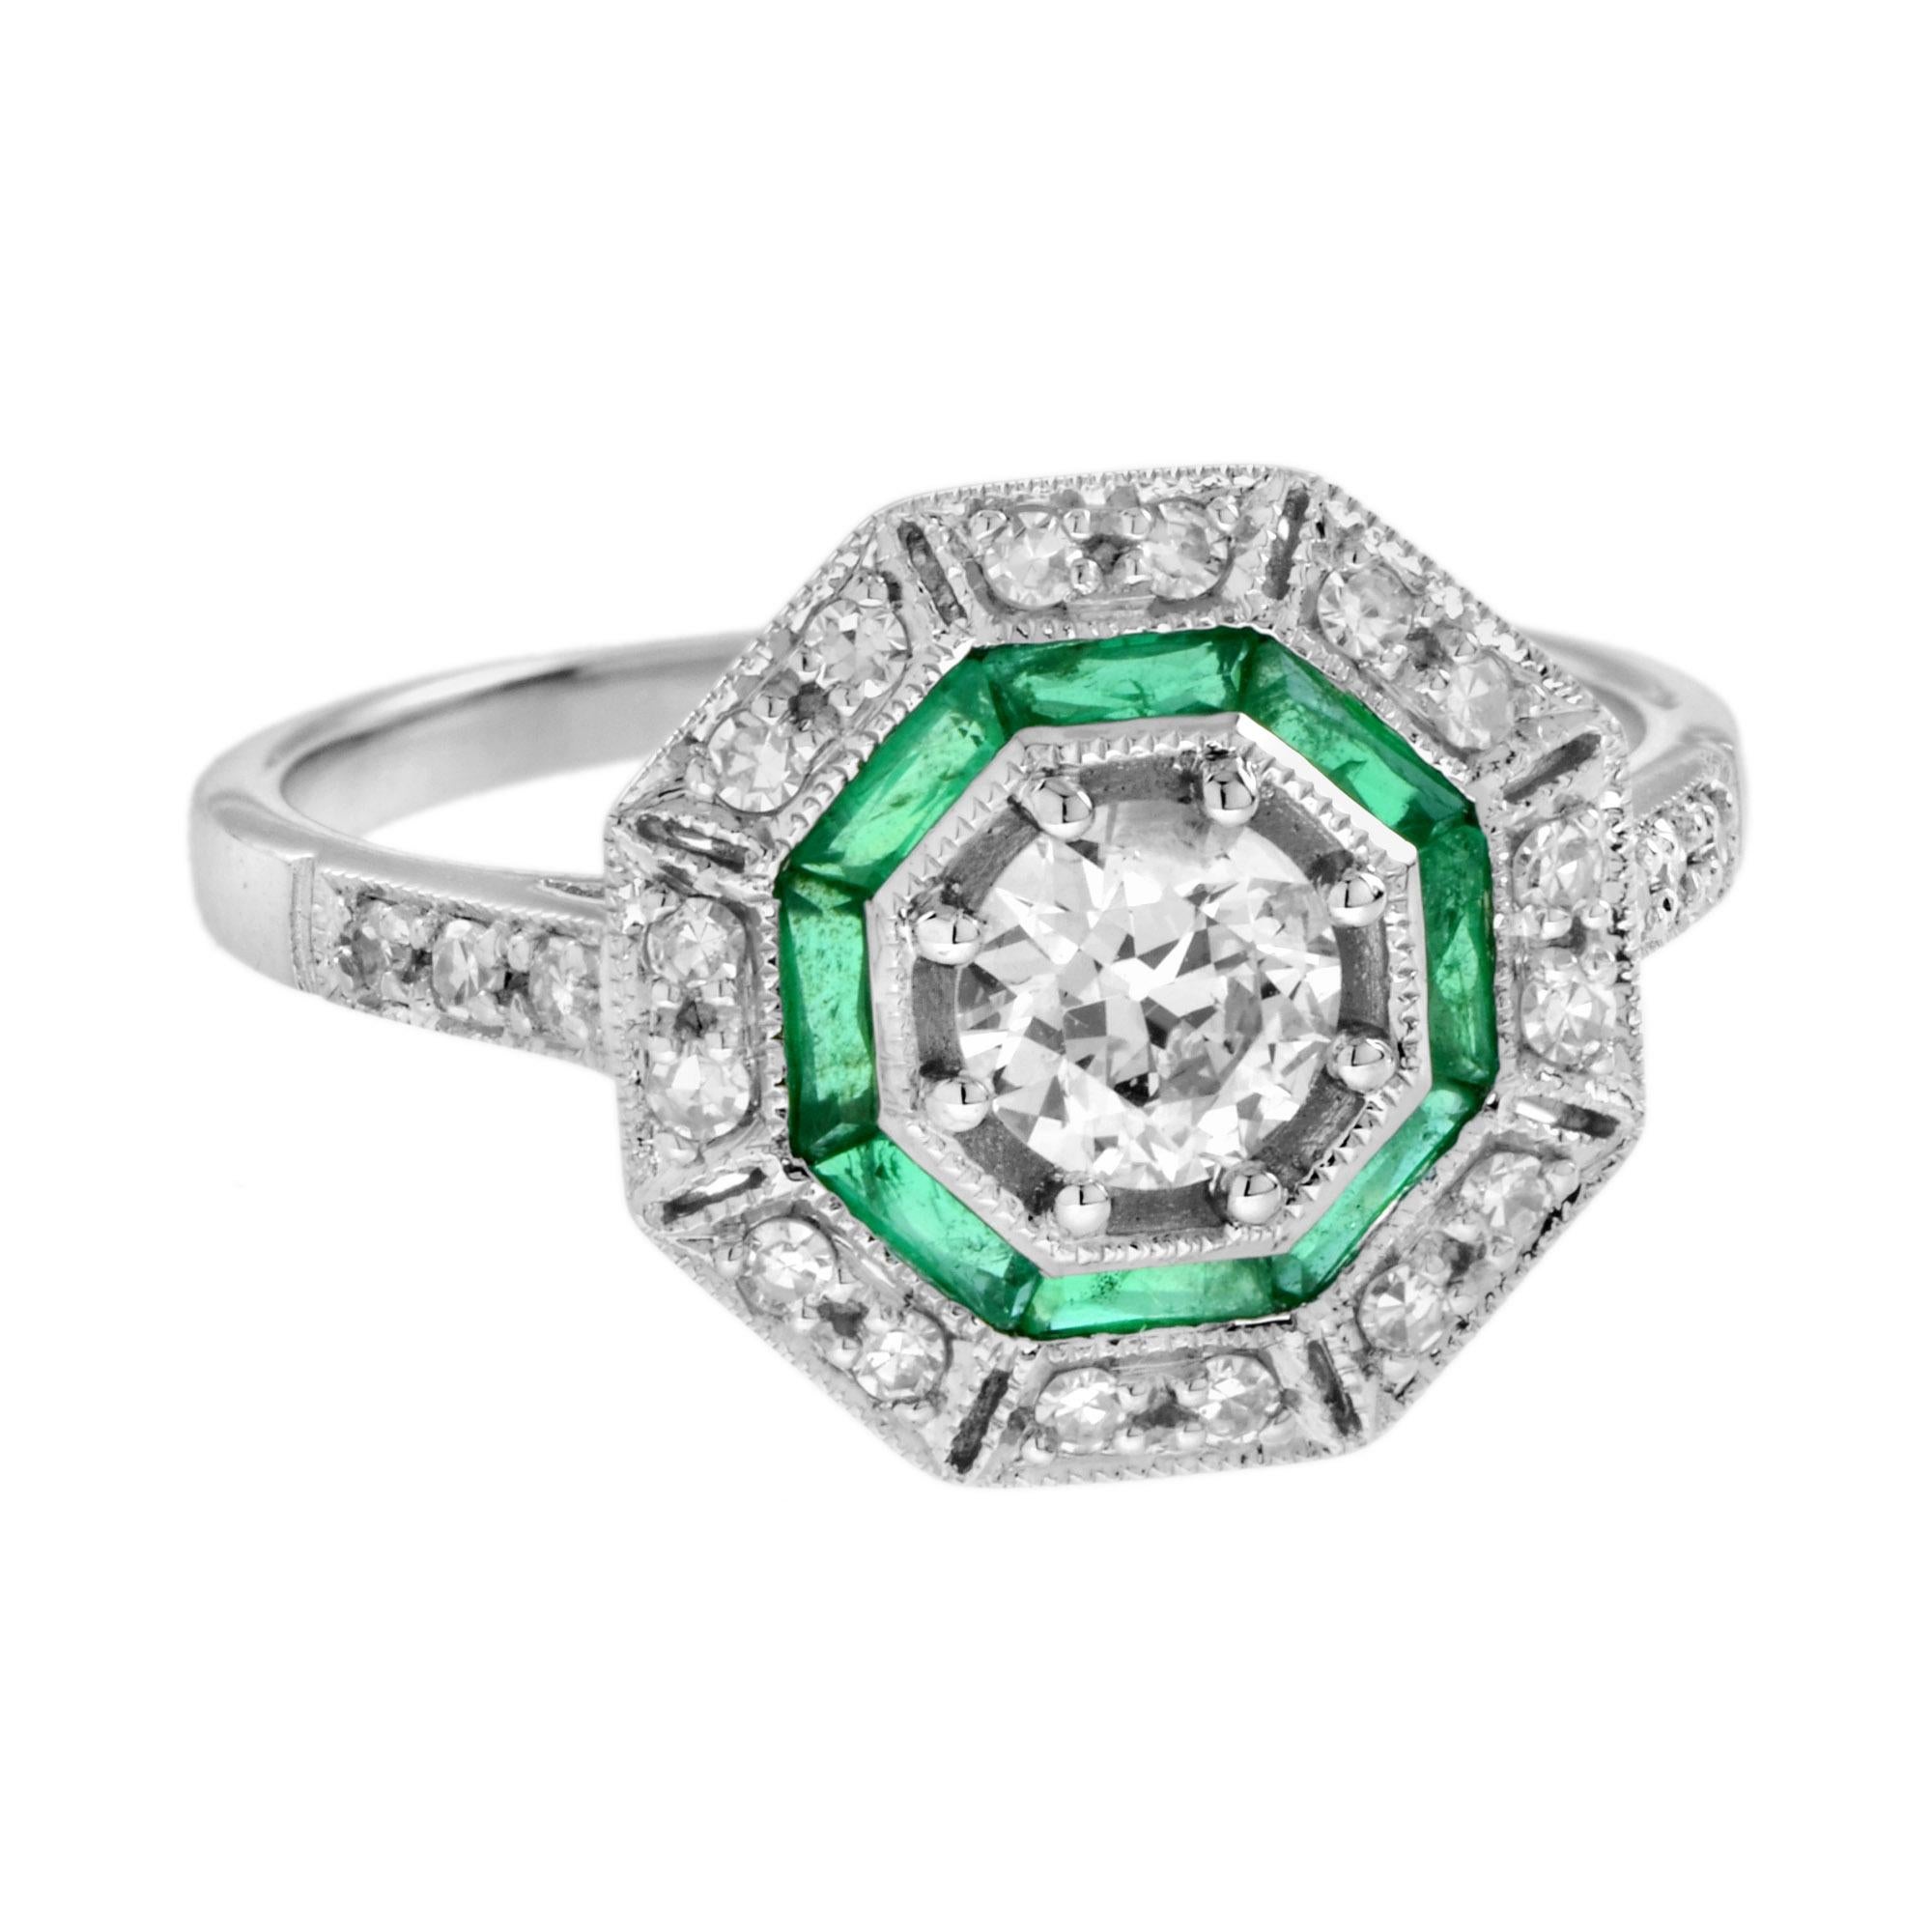 An 18k white gold Art-Deco design diamond and emerald target ring, center diamond with an outer ring of round diamonds an inner one of French cut emeralds and finished with millgrain edging, finished with diamond shoulders.

Ring Information
Style: